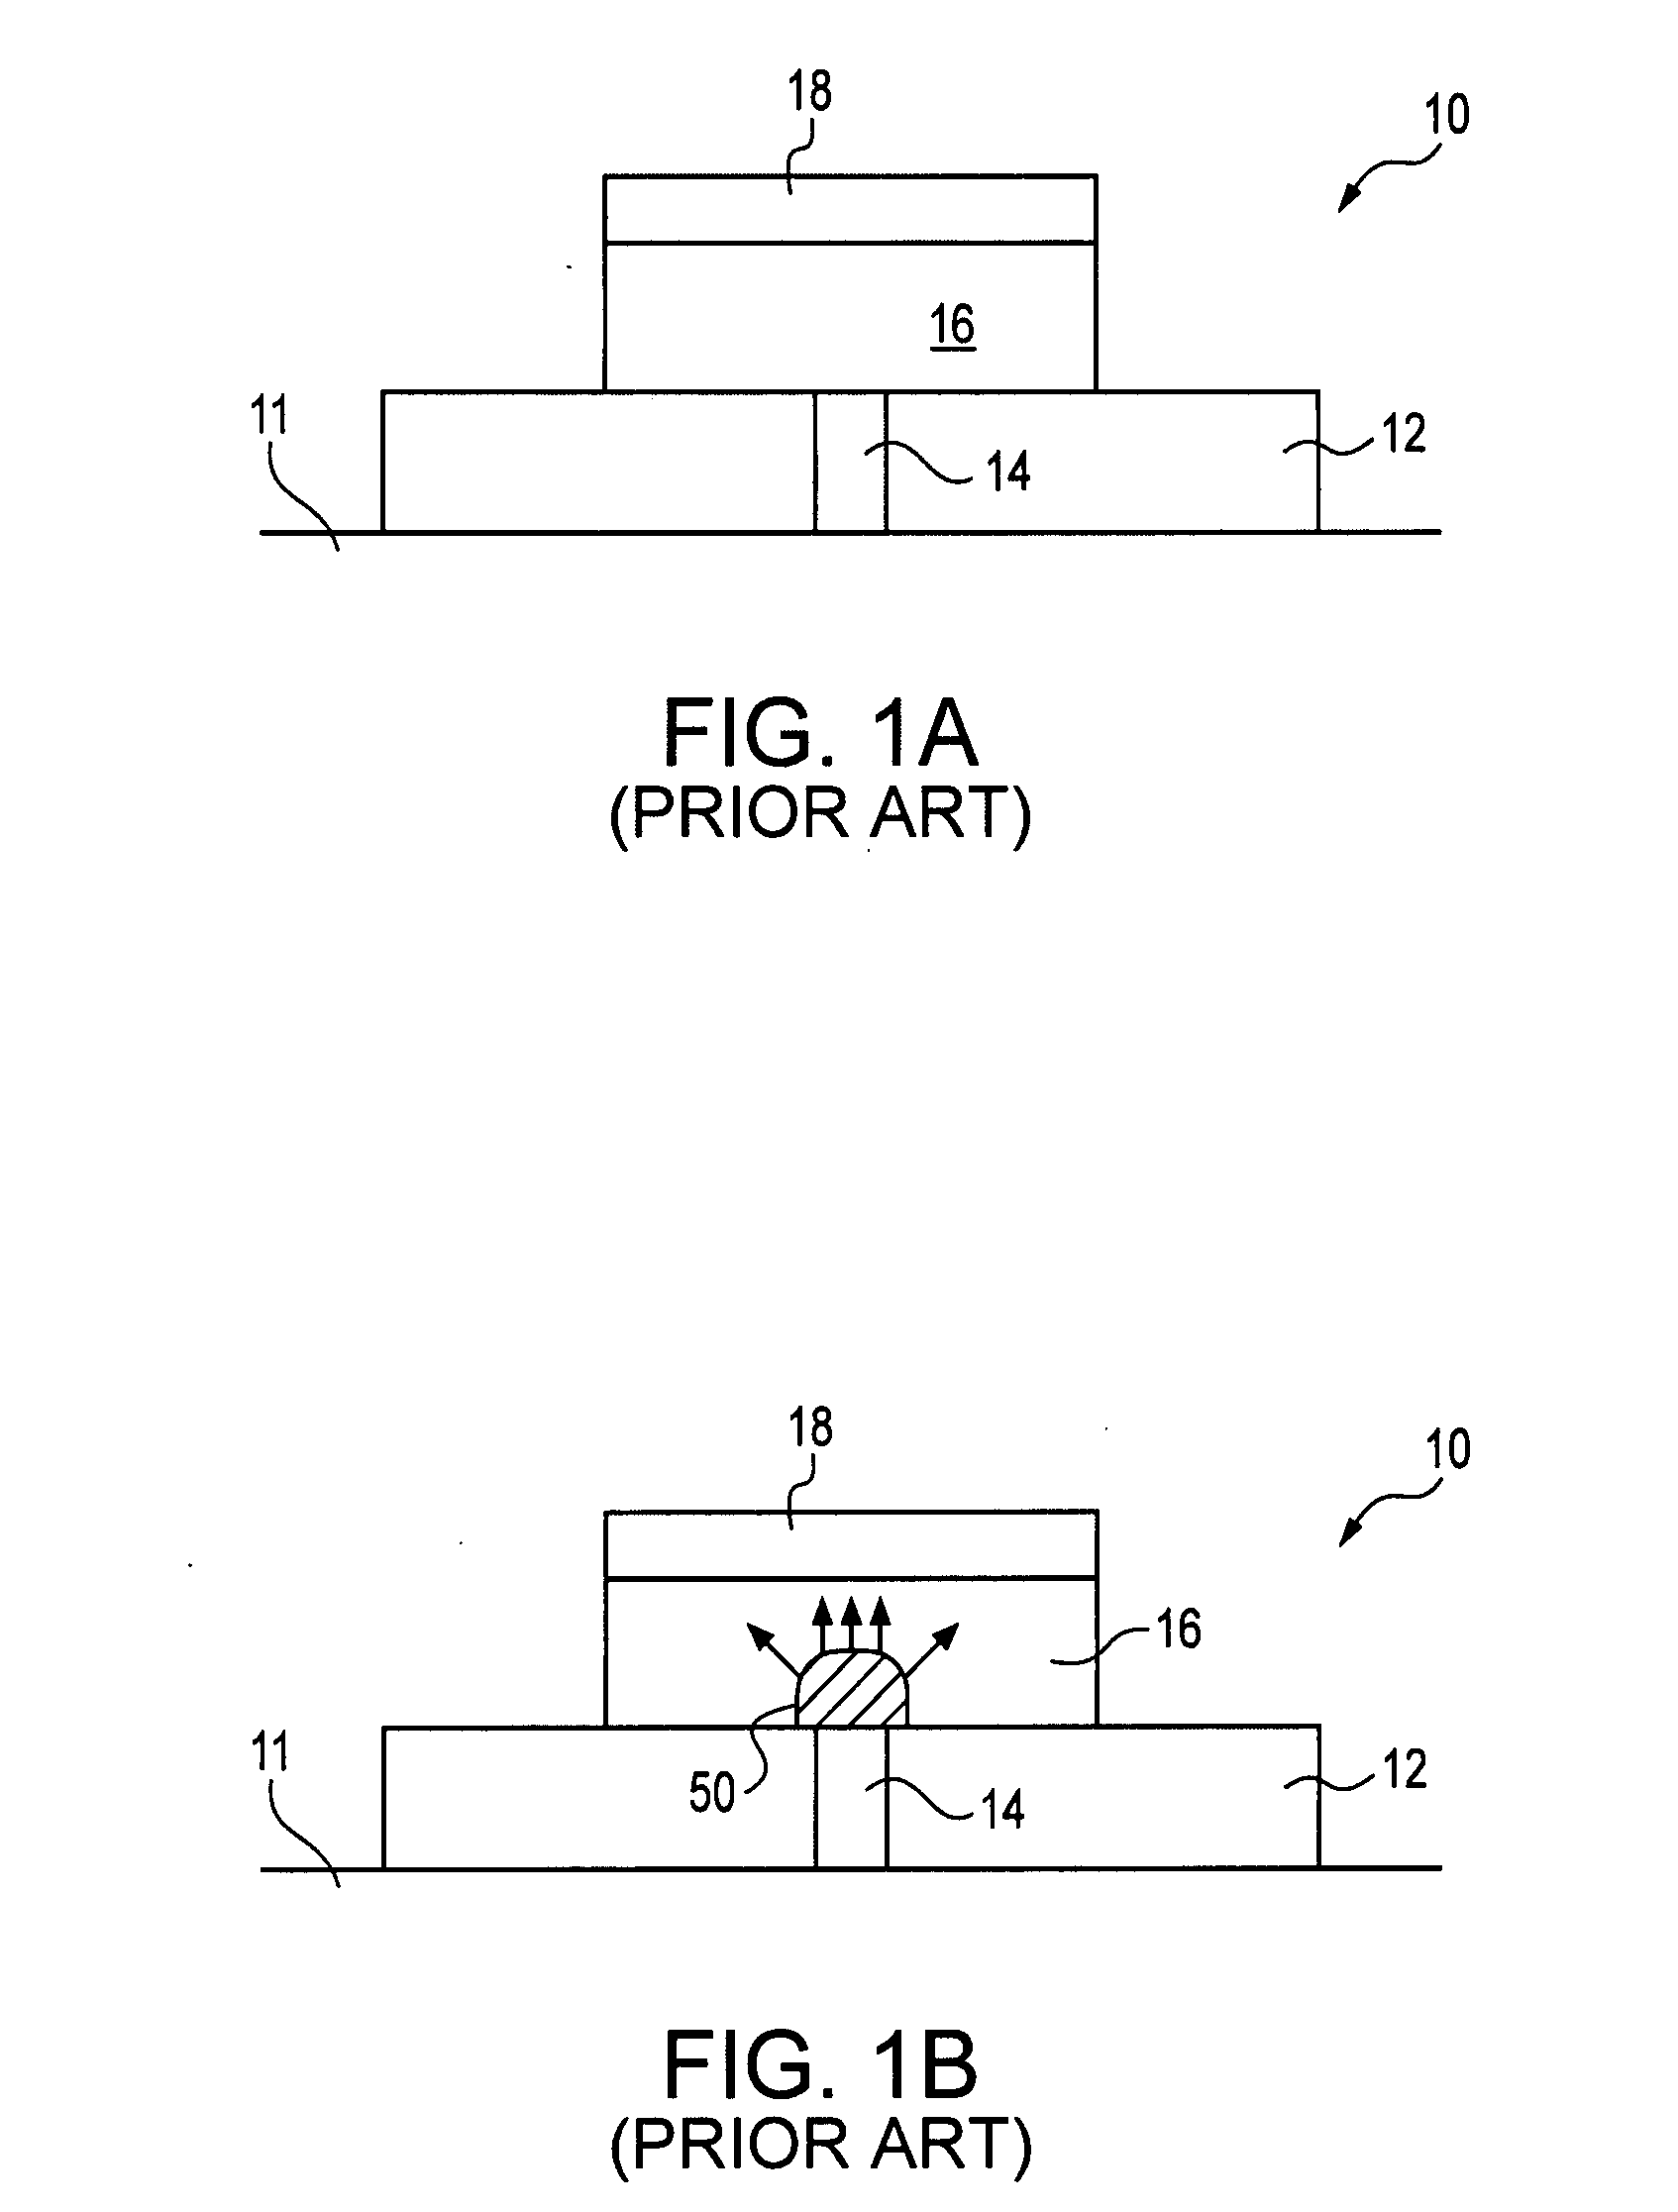 Resistive memory cell fabrication methods and devices